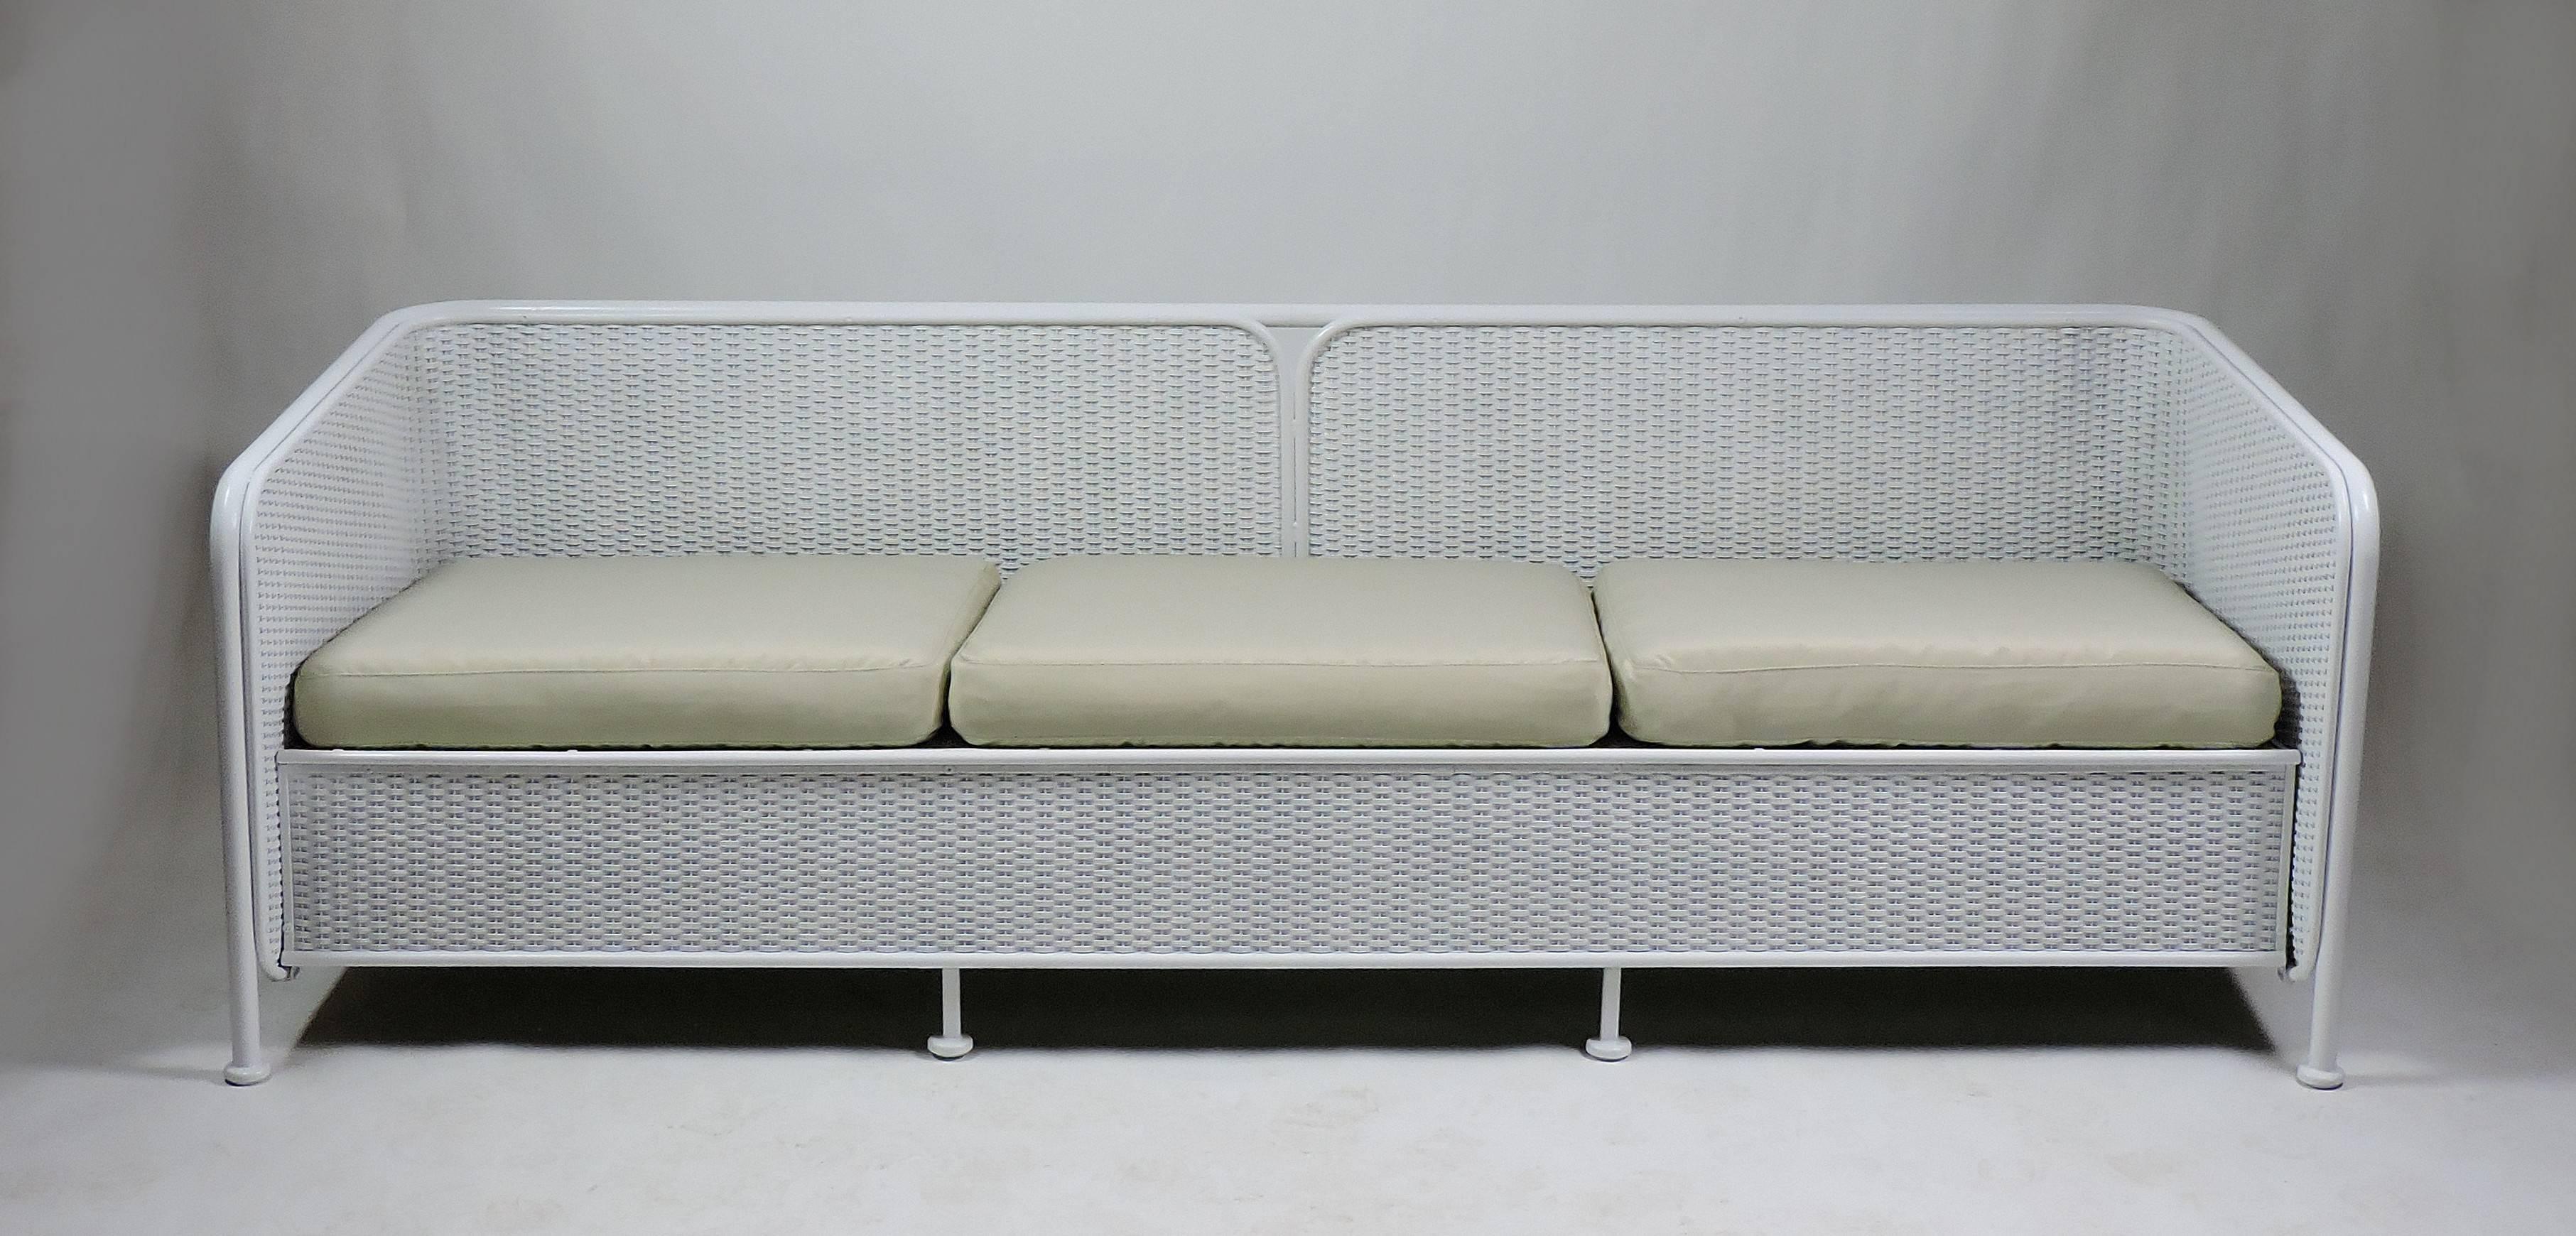 Beautiful midcentury painted wicker sofa with a metal frame that has distinctive rounded edges that give it an Art Deco look. Substantial and well made, this has been freshened up with a new coat of white paint. The cushions are only for display and